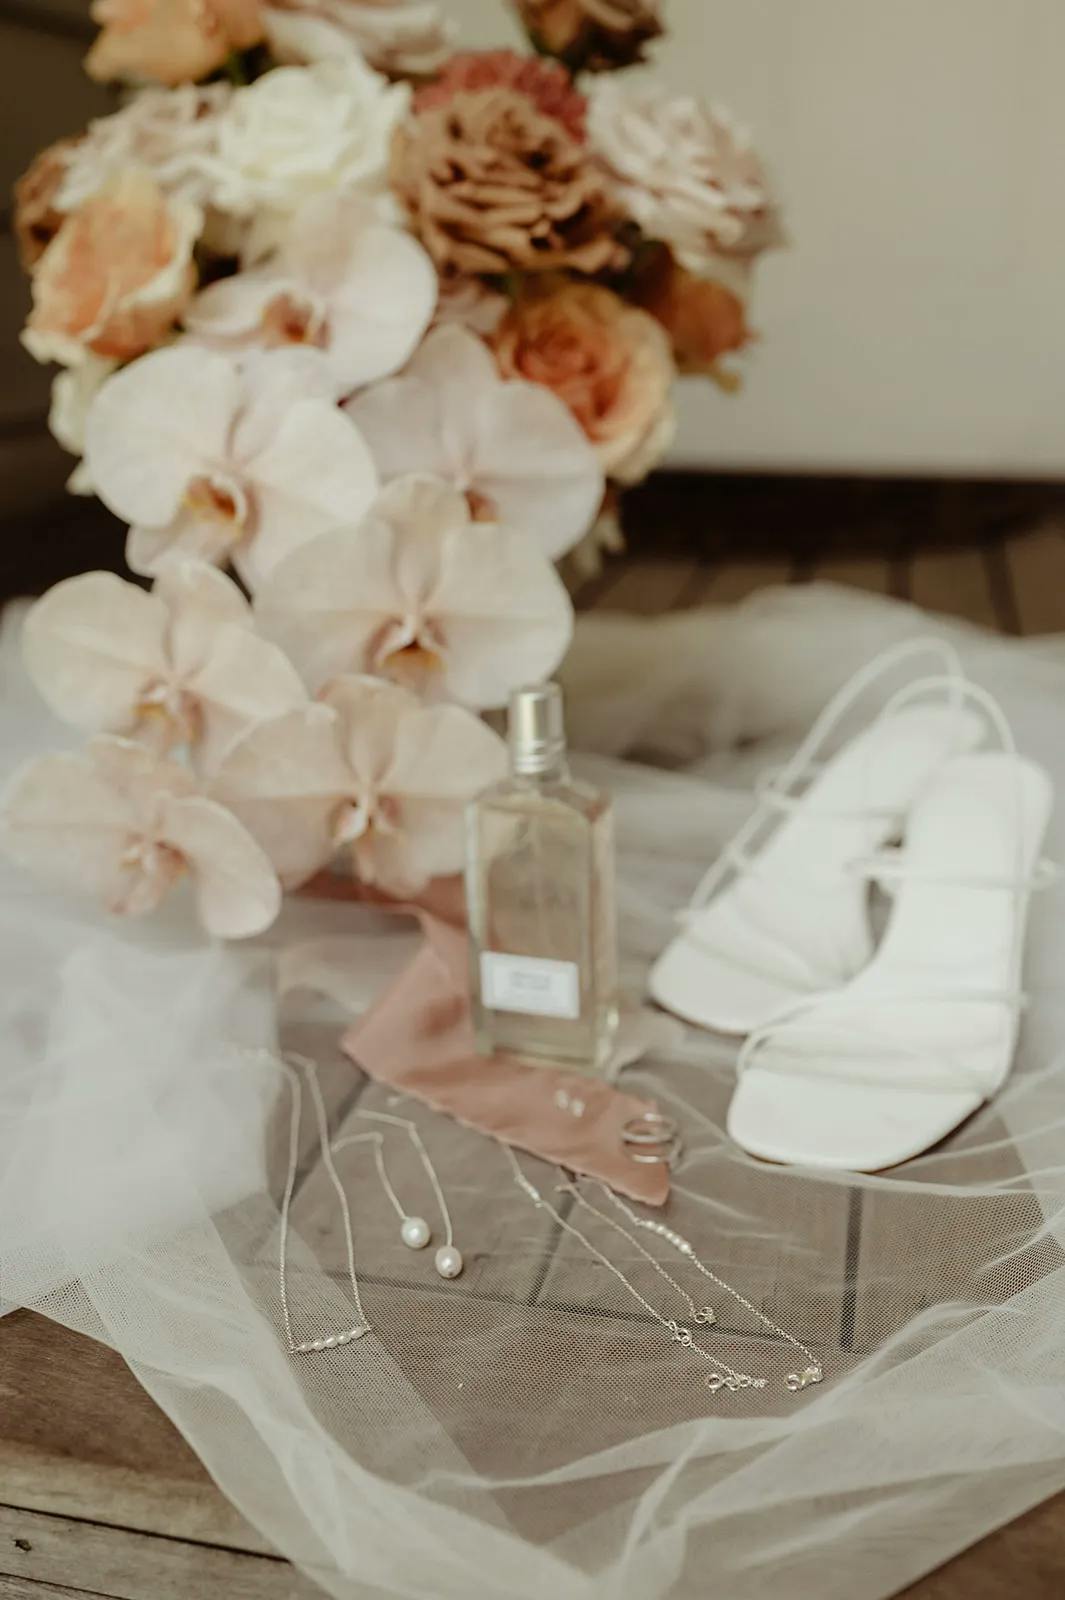 A wedding scene featuring a bouquet of flowers with cream and peach roses and orchids, a pair of white strappy high heels, a bottle of perfume, and various pieces of delicate jewelry including necklaces, earrings, and rings, all arranged on a soft veil.